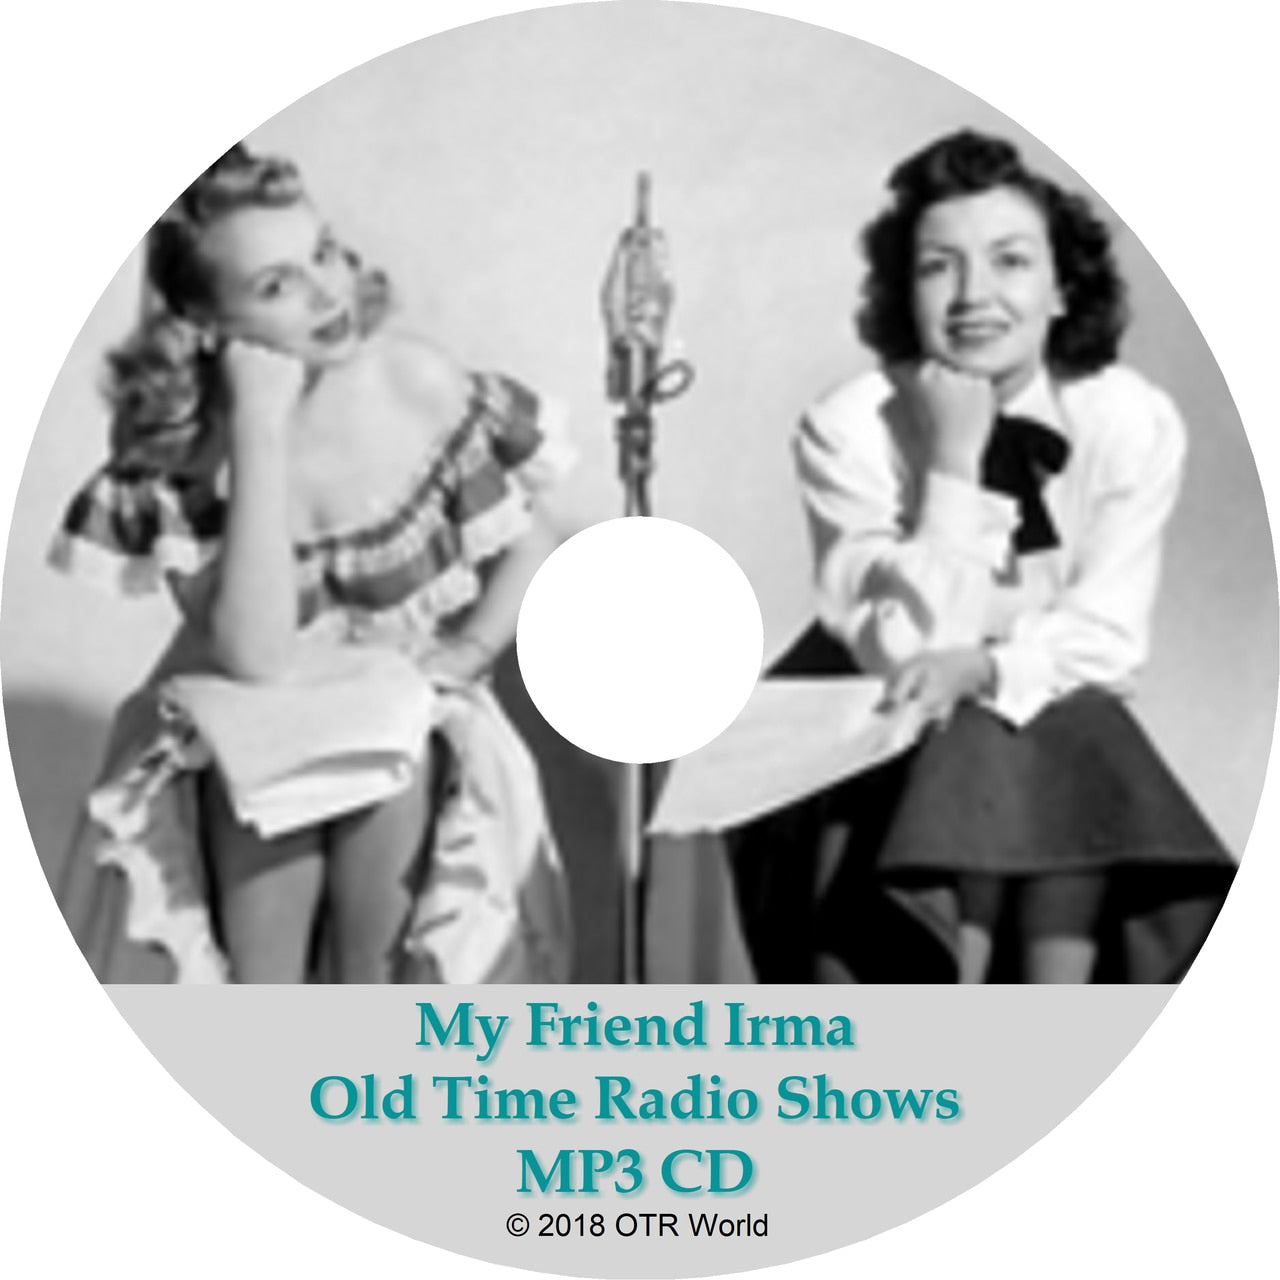 My Friend Irma OTR Old Time Radio Show MP3 On CD 83 Episodes